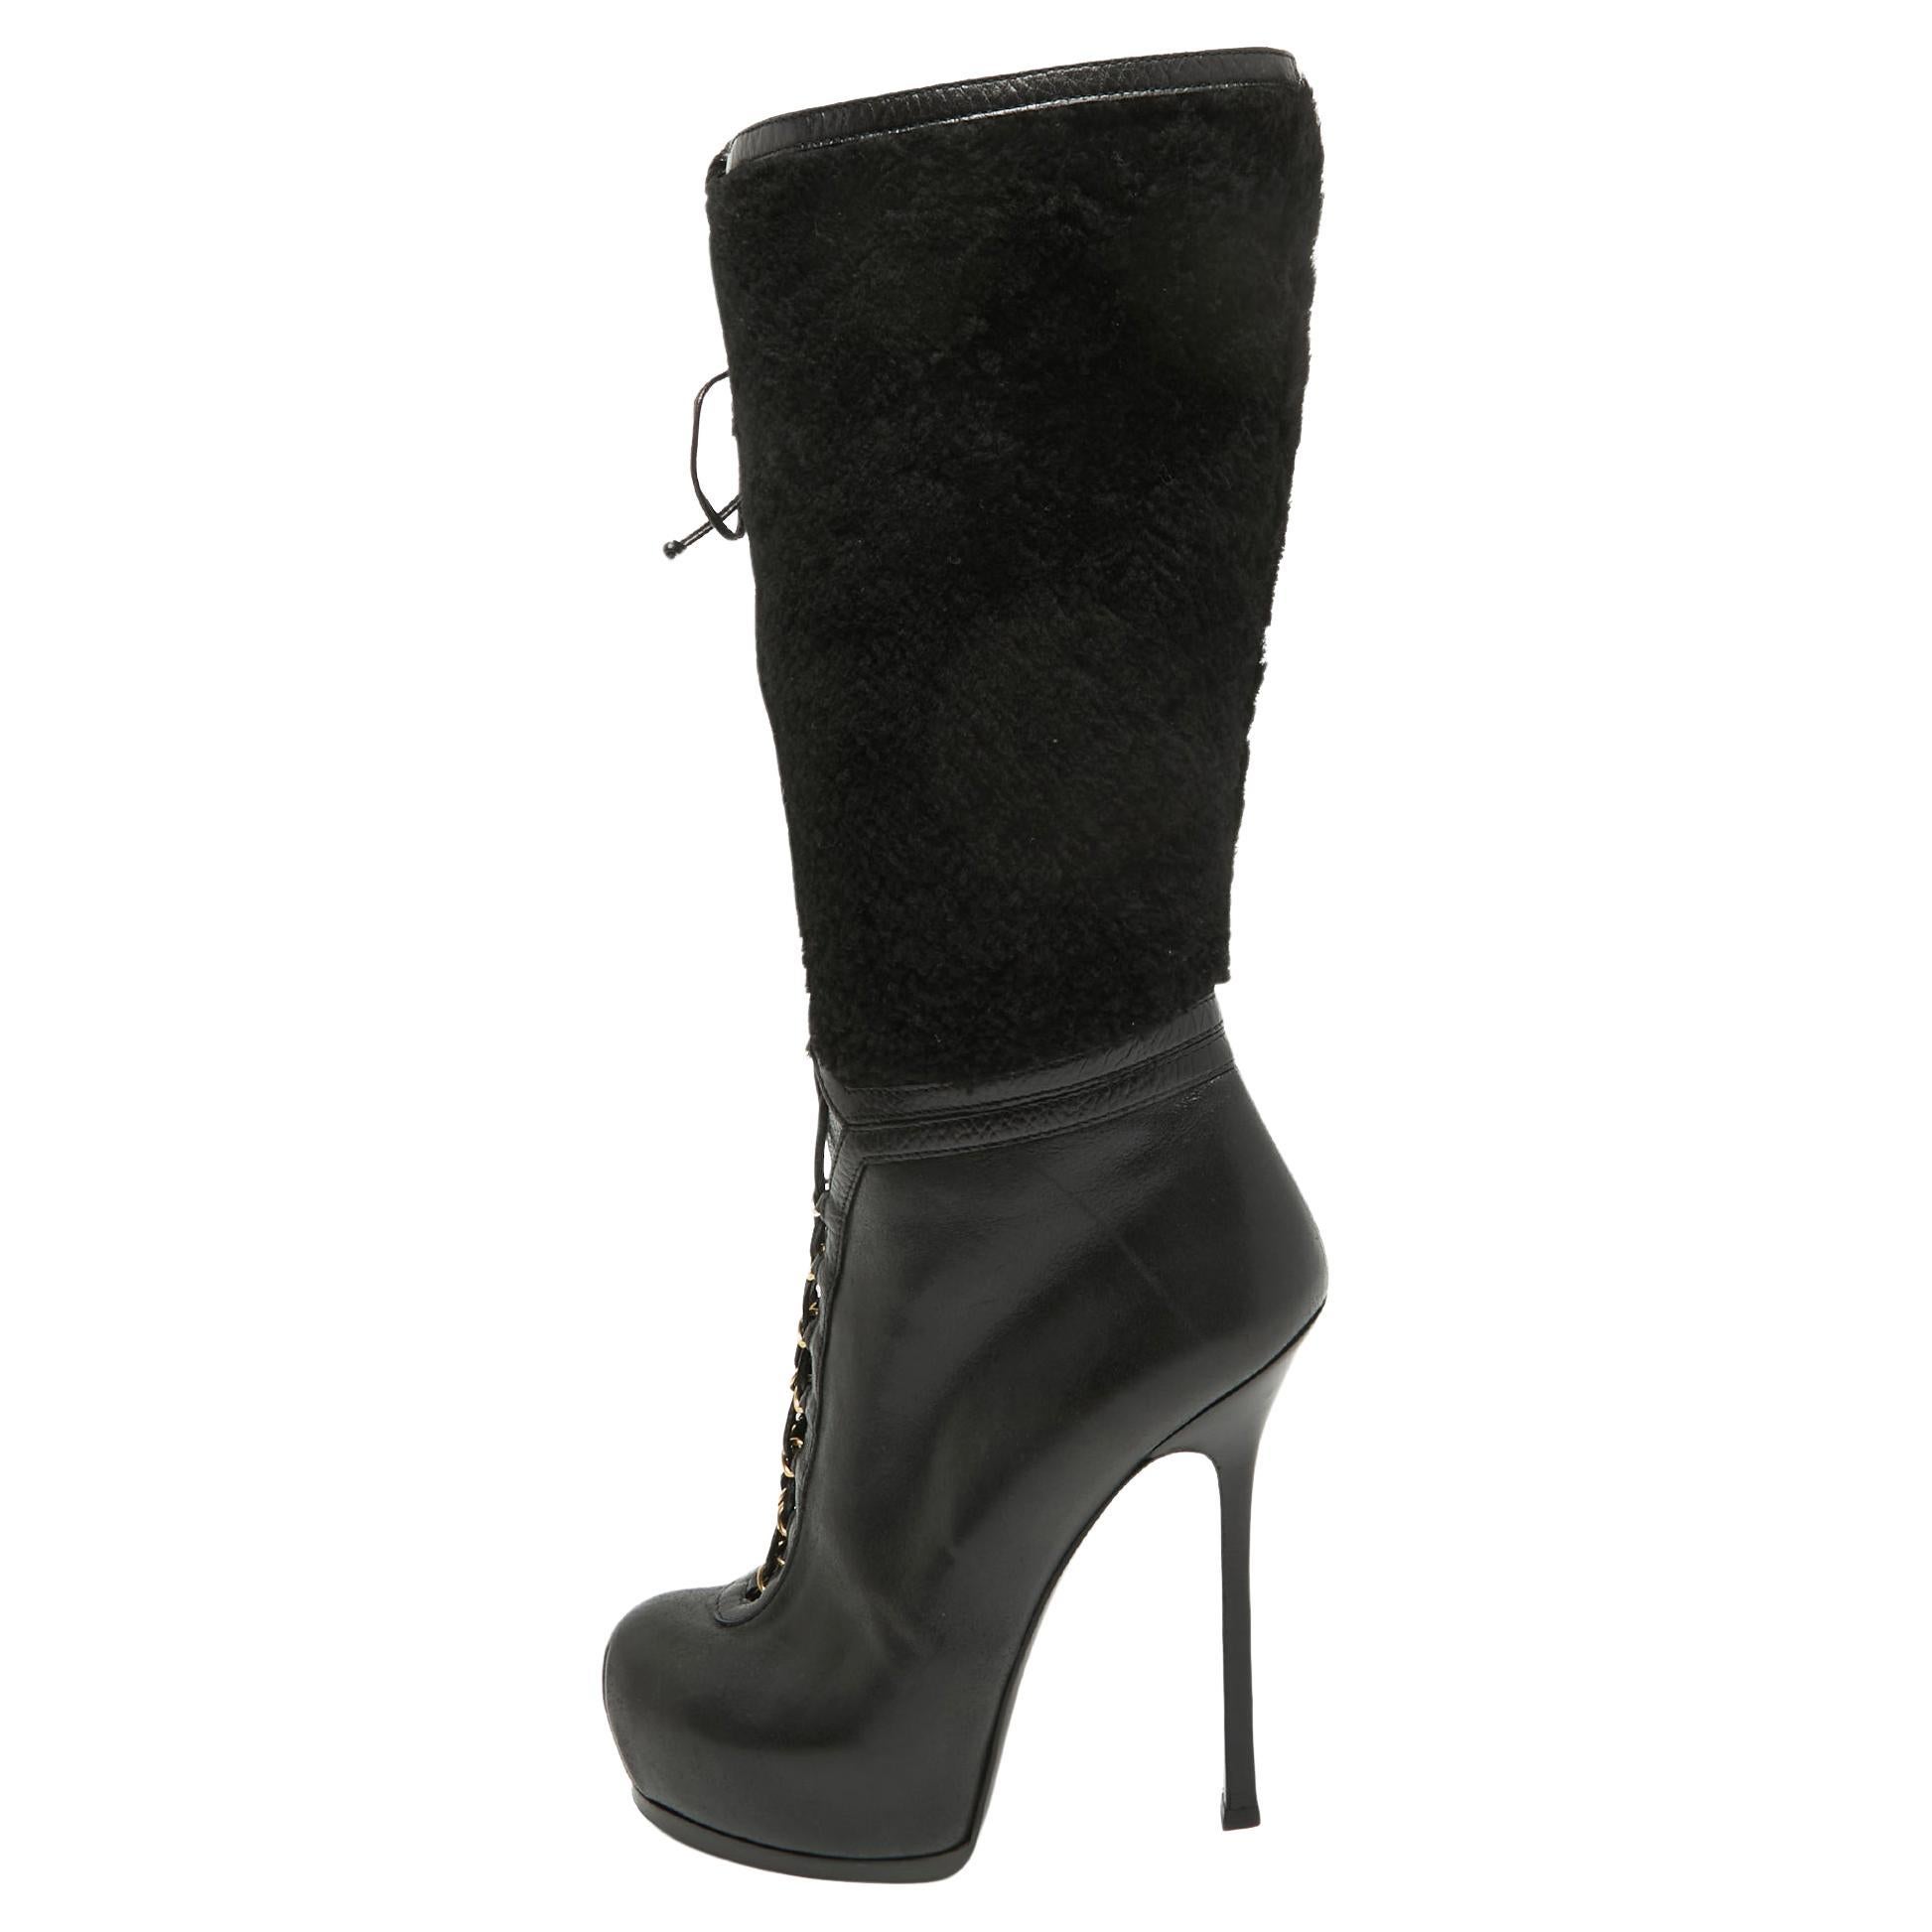 Yves Saint Laurent Black Leather and Wool Platform Mid Calf Boots Size 39.5 For Sale